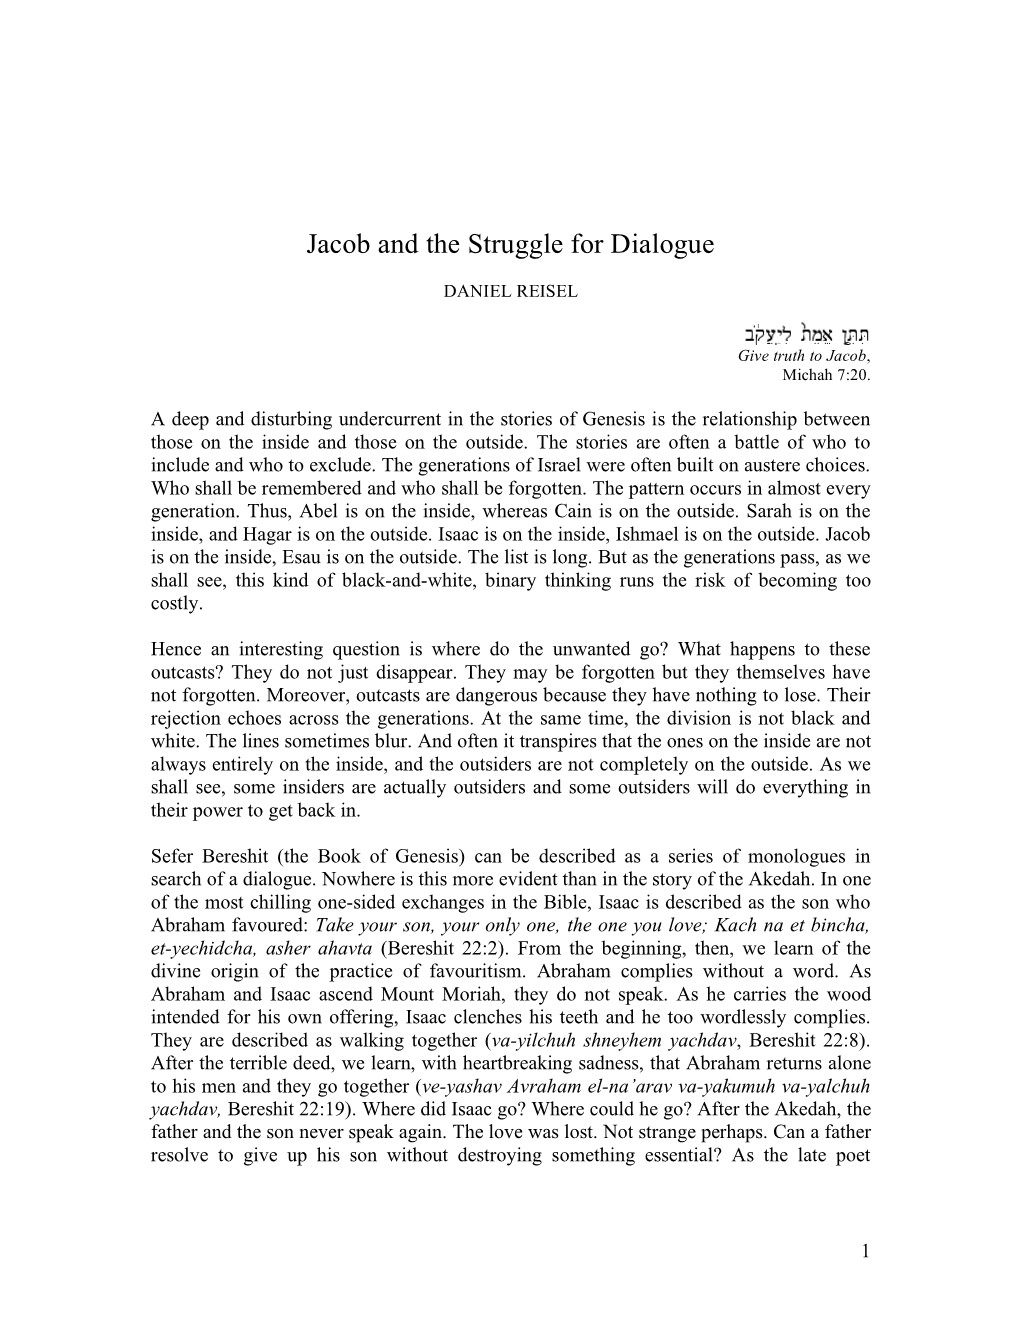 Jacob and the Struggle for Dialogue